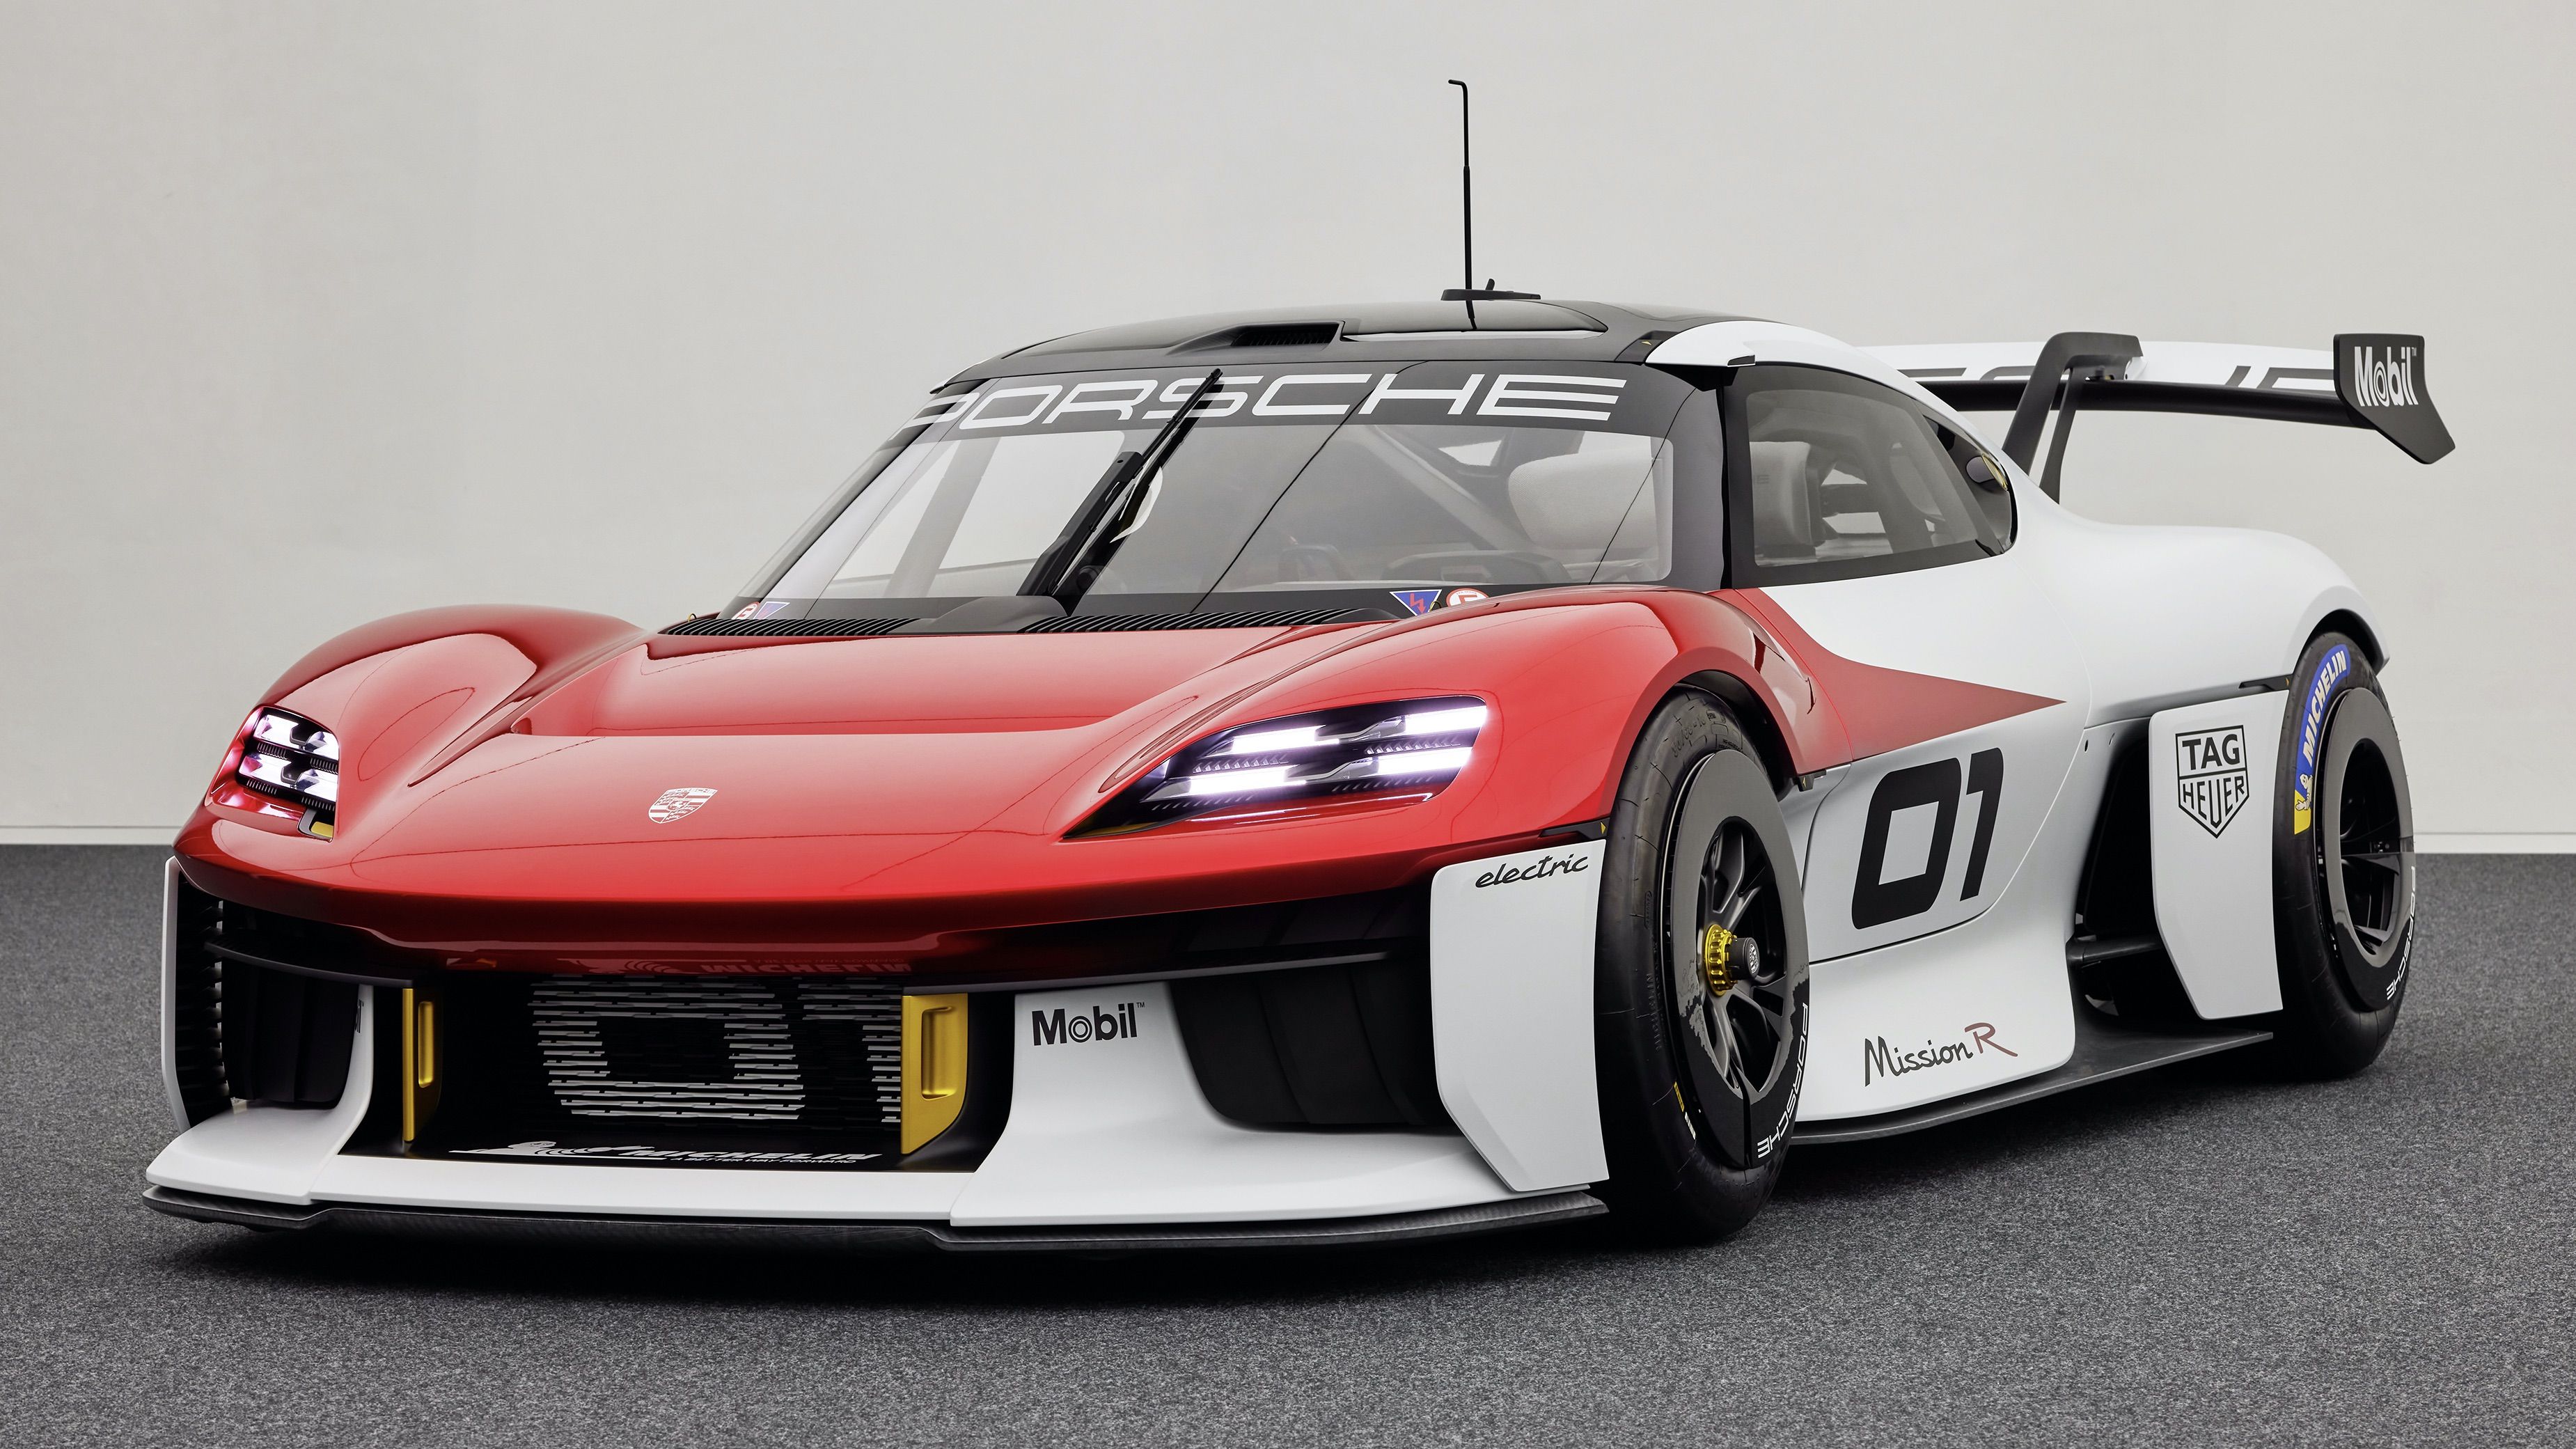 Porsche Mission R (GT racing spec) - Previously Considered